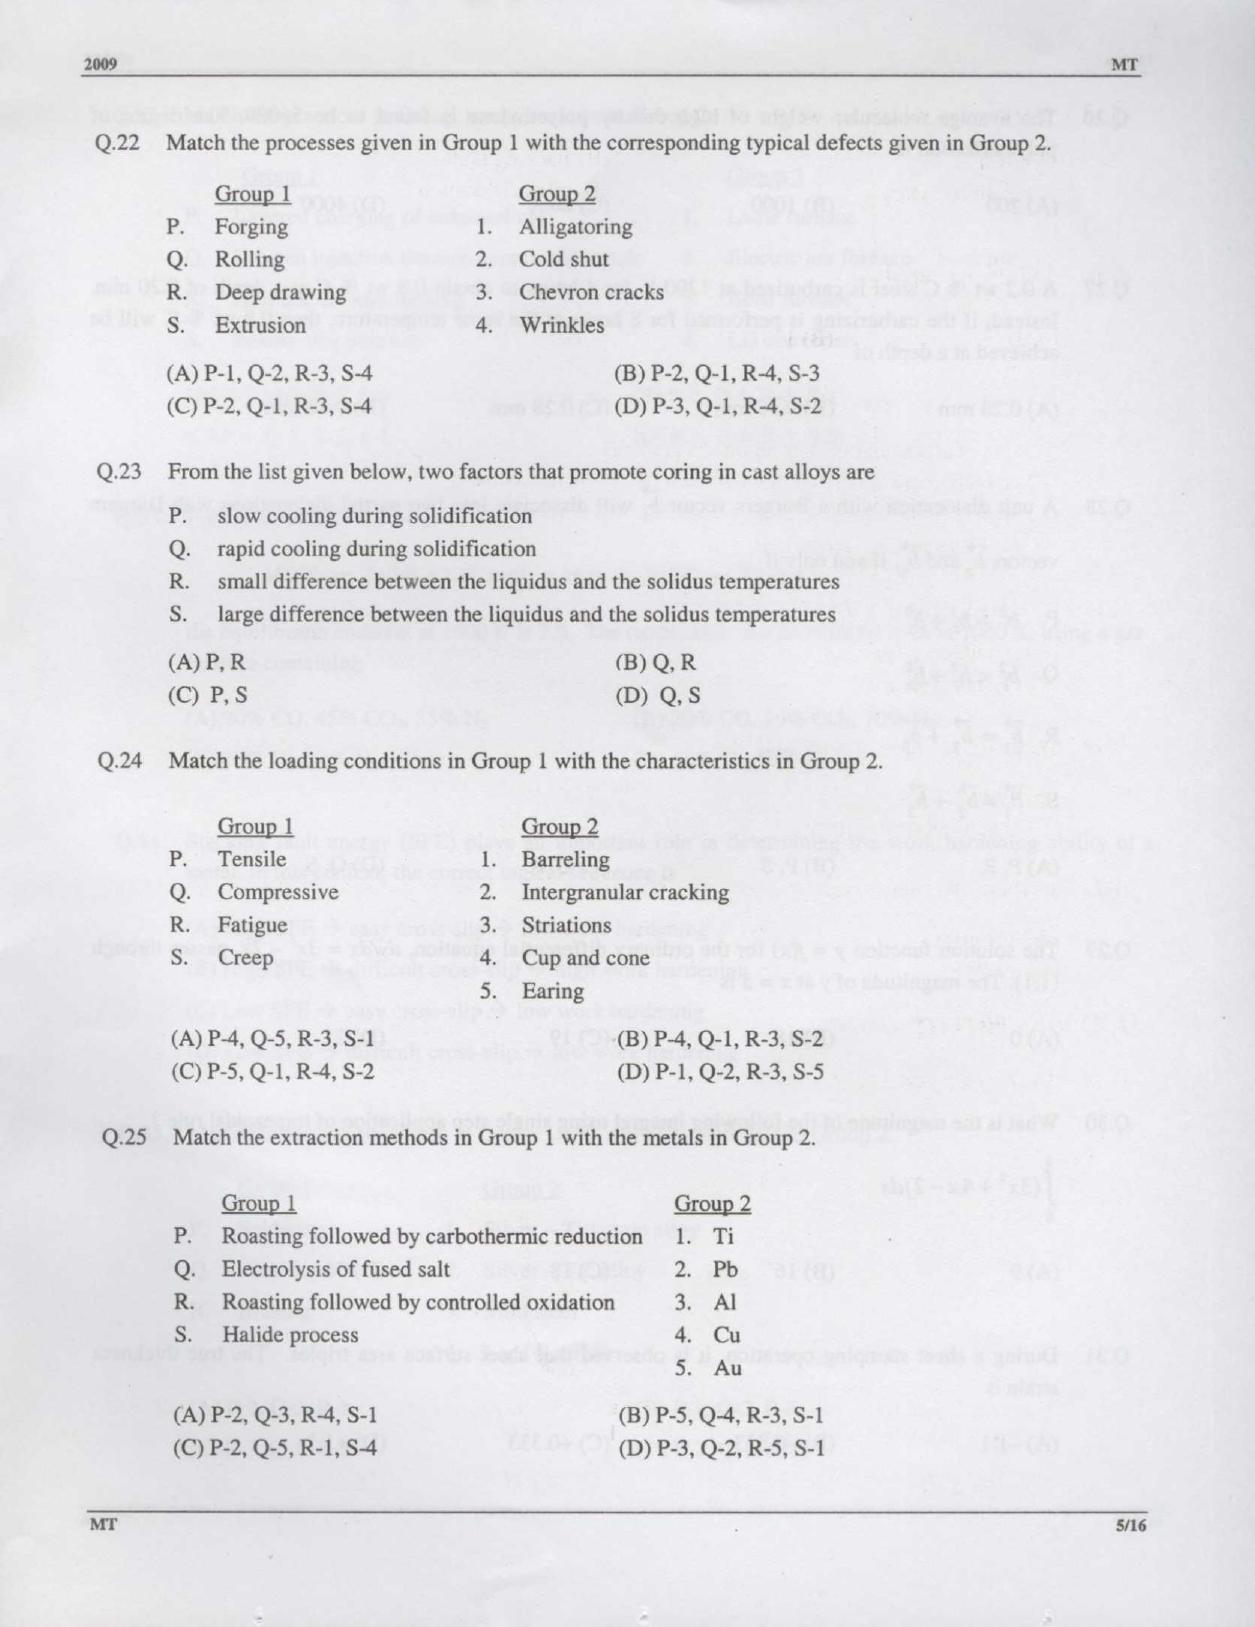 GATE 2009 Metallurgical Engineering (MT) Question Paper with Answer Key - Page 5